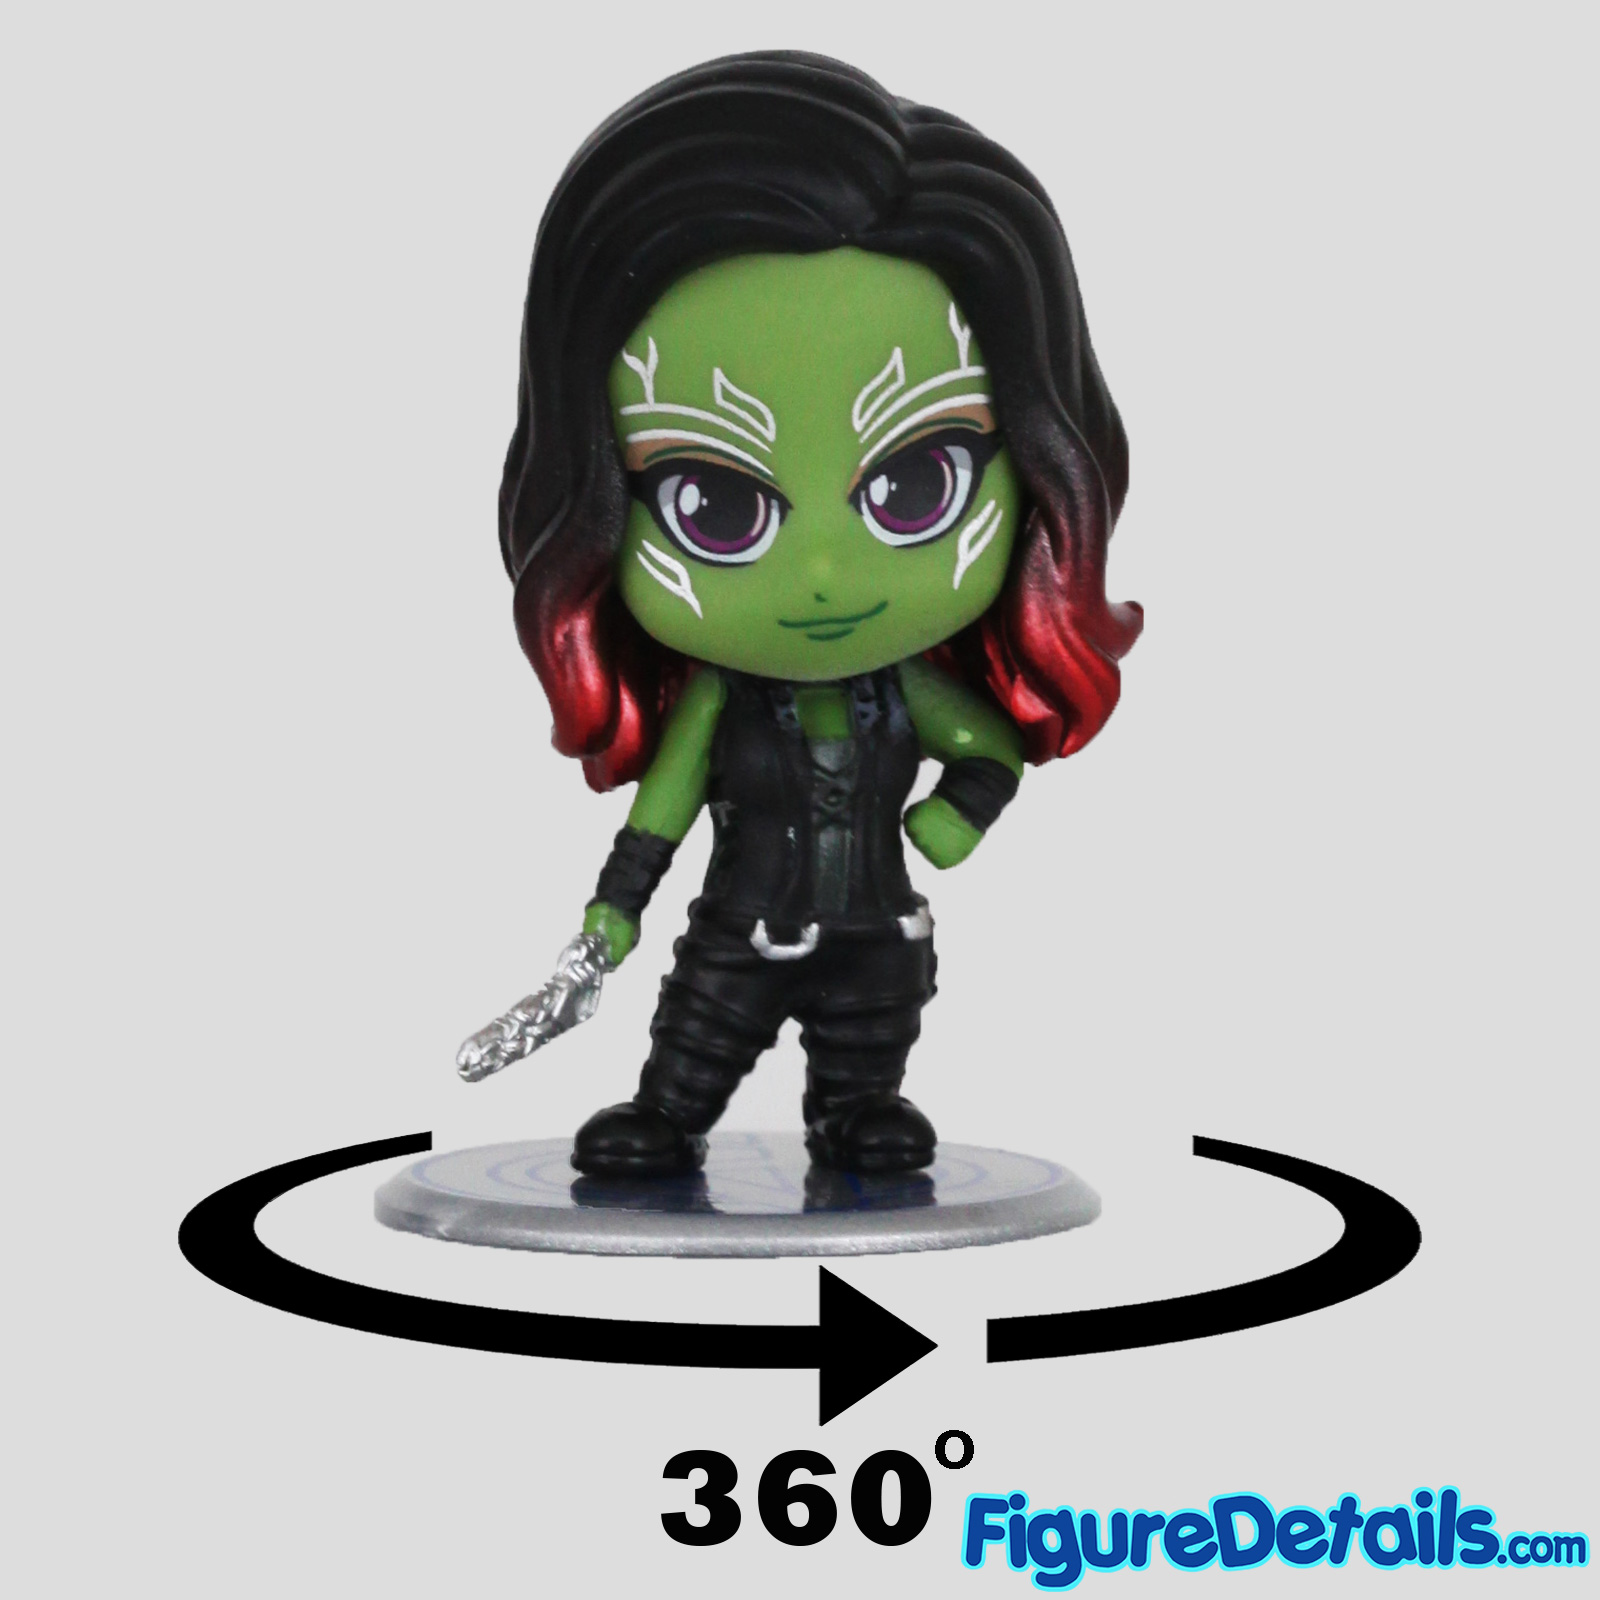 Hot Toys Gamora Cosbaby cosb682 Review in 360 Degree - Avengers Endgame - Guardians of the Galaxy 1